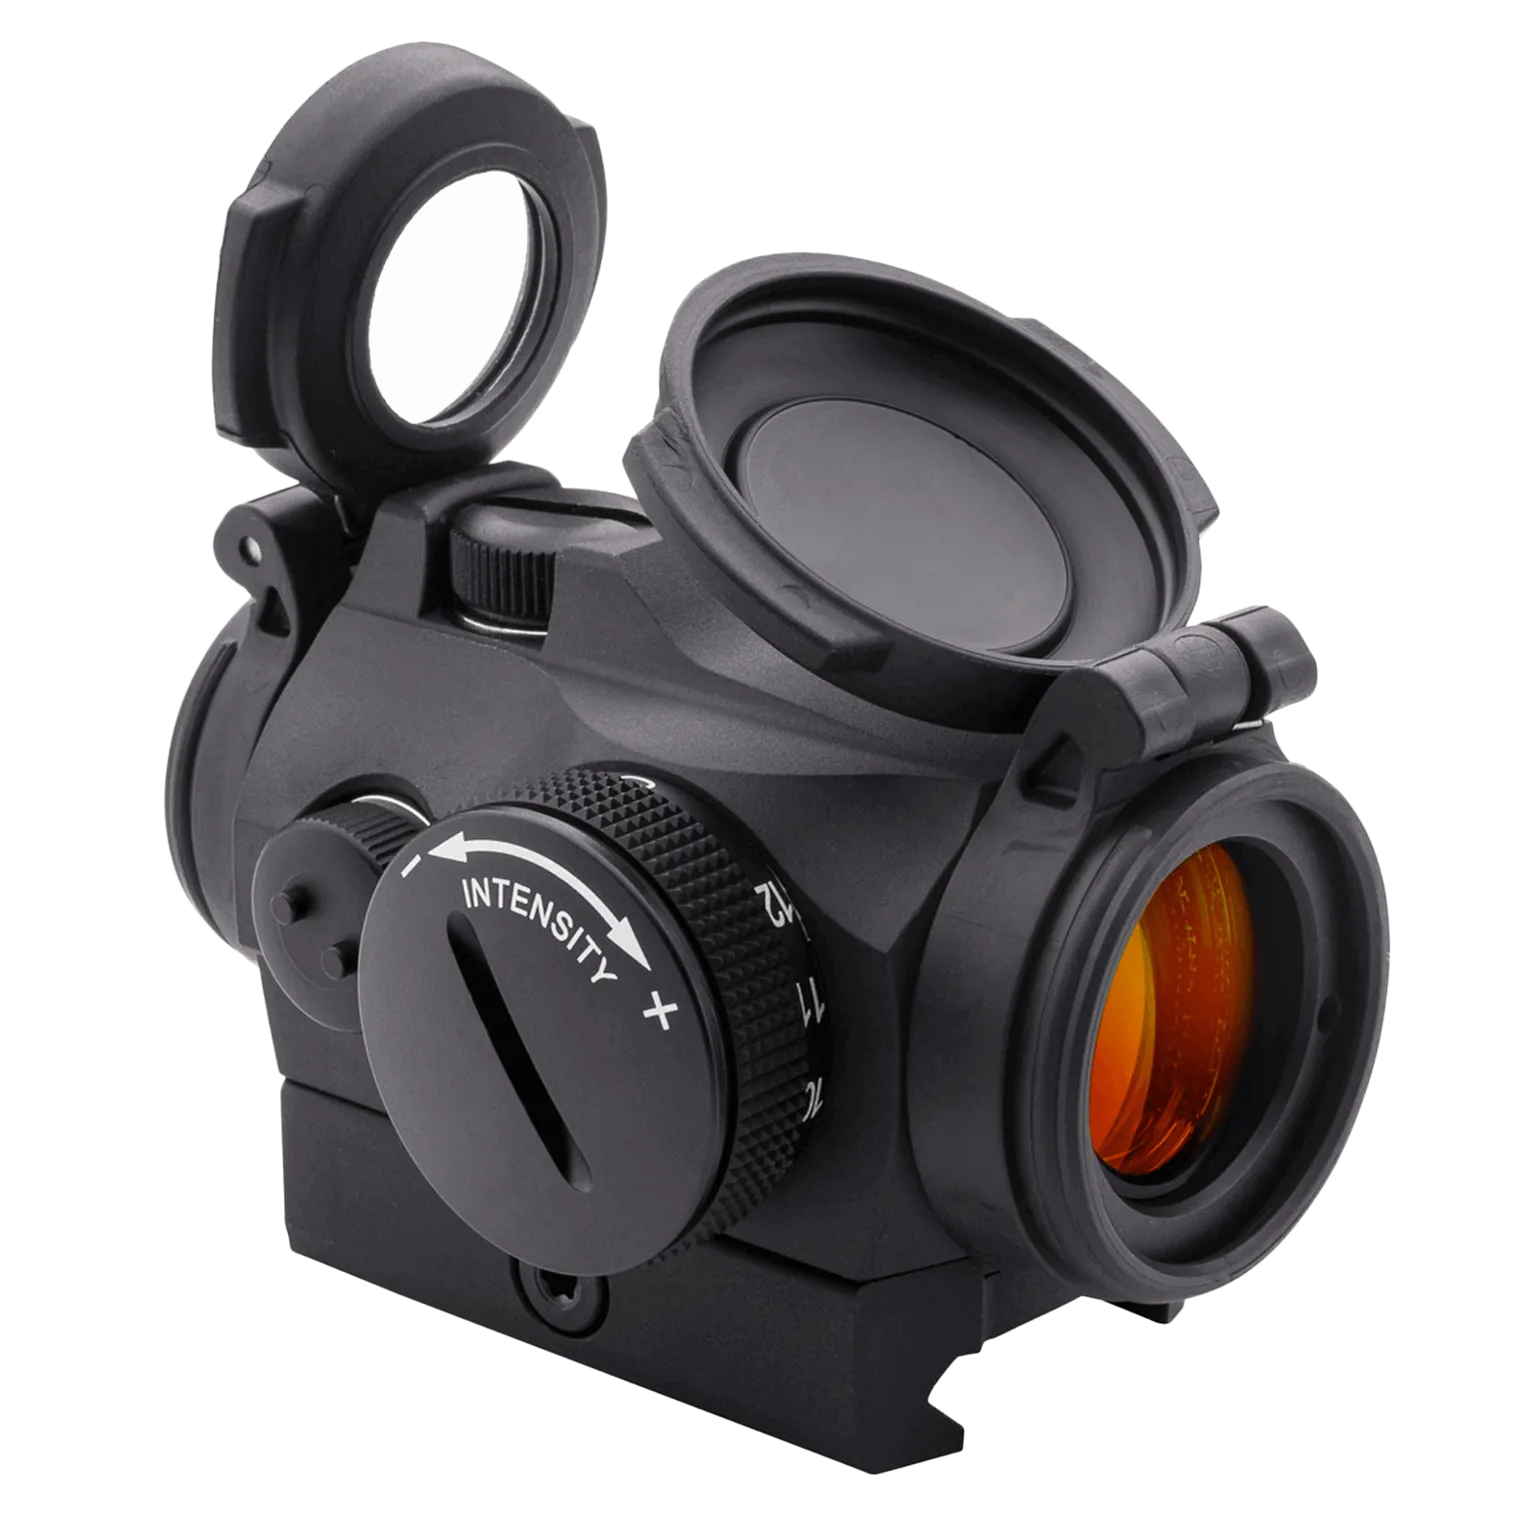 Micro T-2™ 2 MOA - Red dot reflex sight with standard mount for Weaver/Picatinny - 3